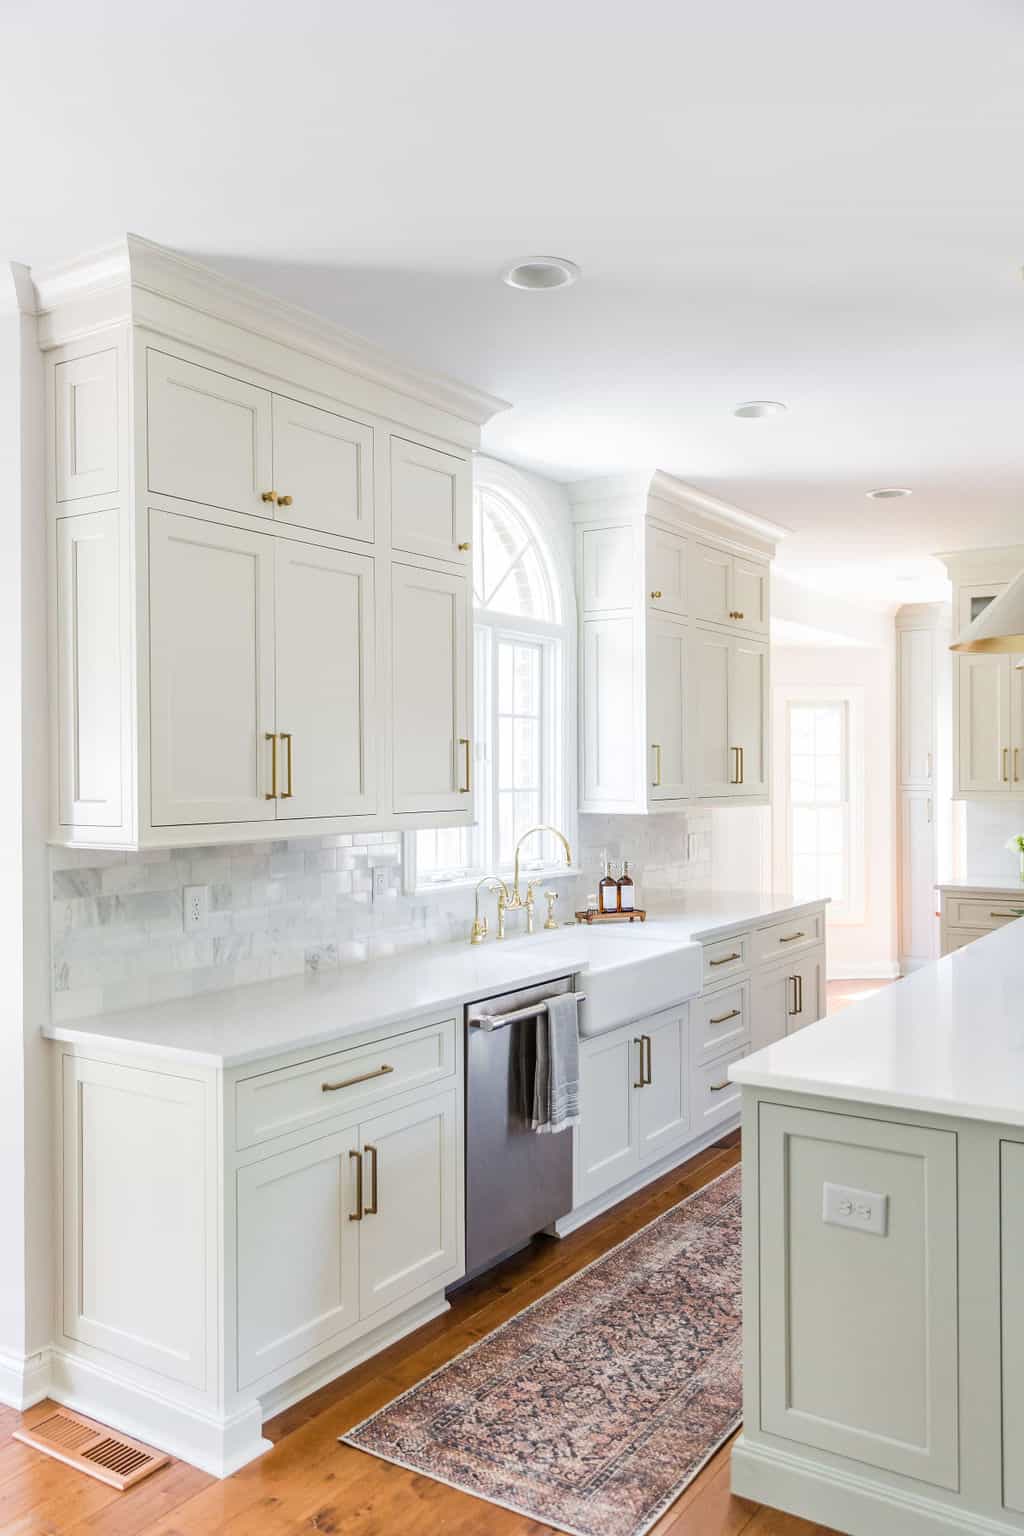 Nicholas Design Build | Remodel: A white kitchen with hardwood floors and a rug undergoing a renovation.